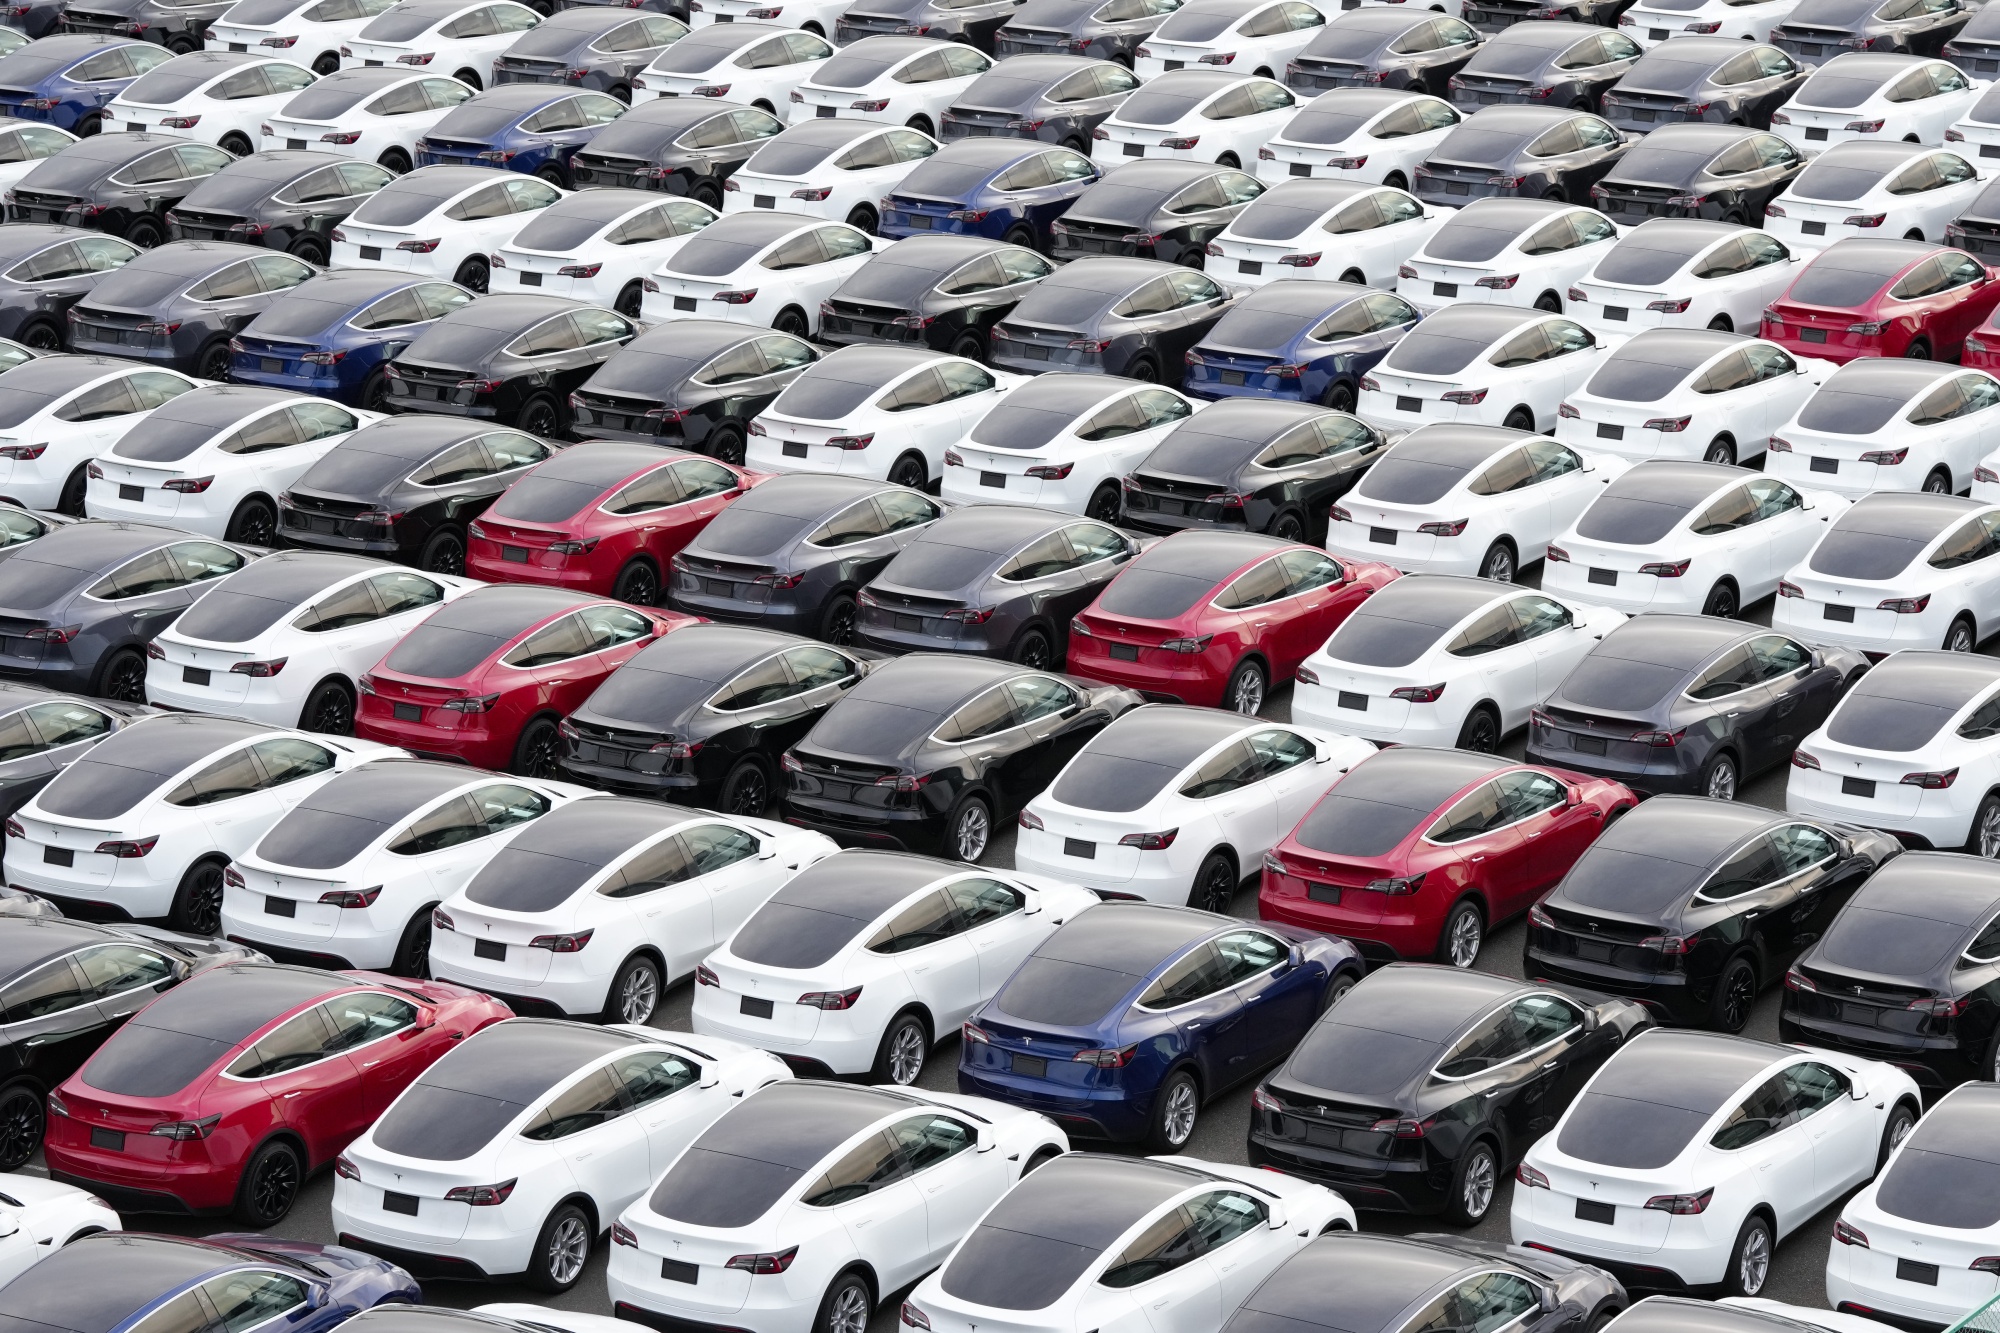 Tesla is offering deals after producing 46,561 more vehicles than it delivered in the first quarter.